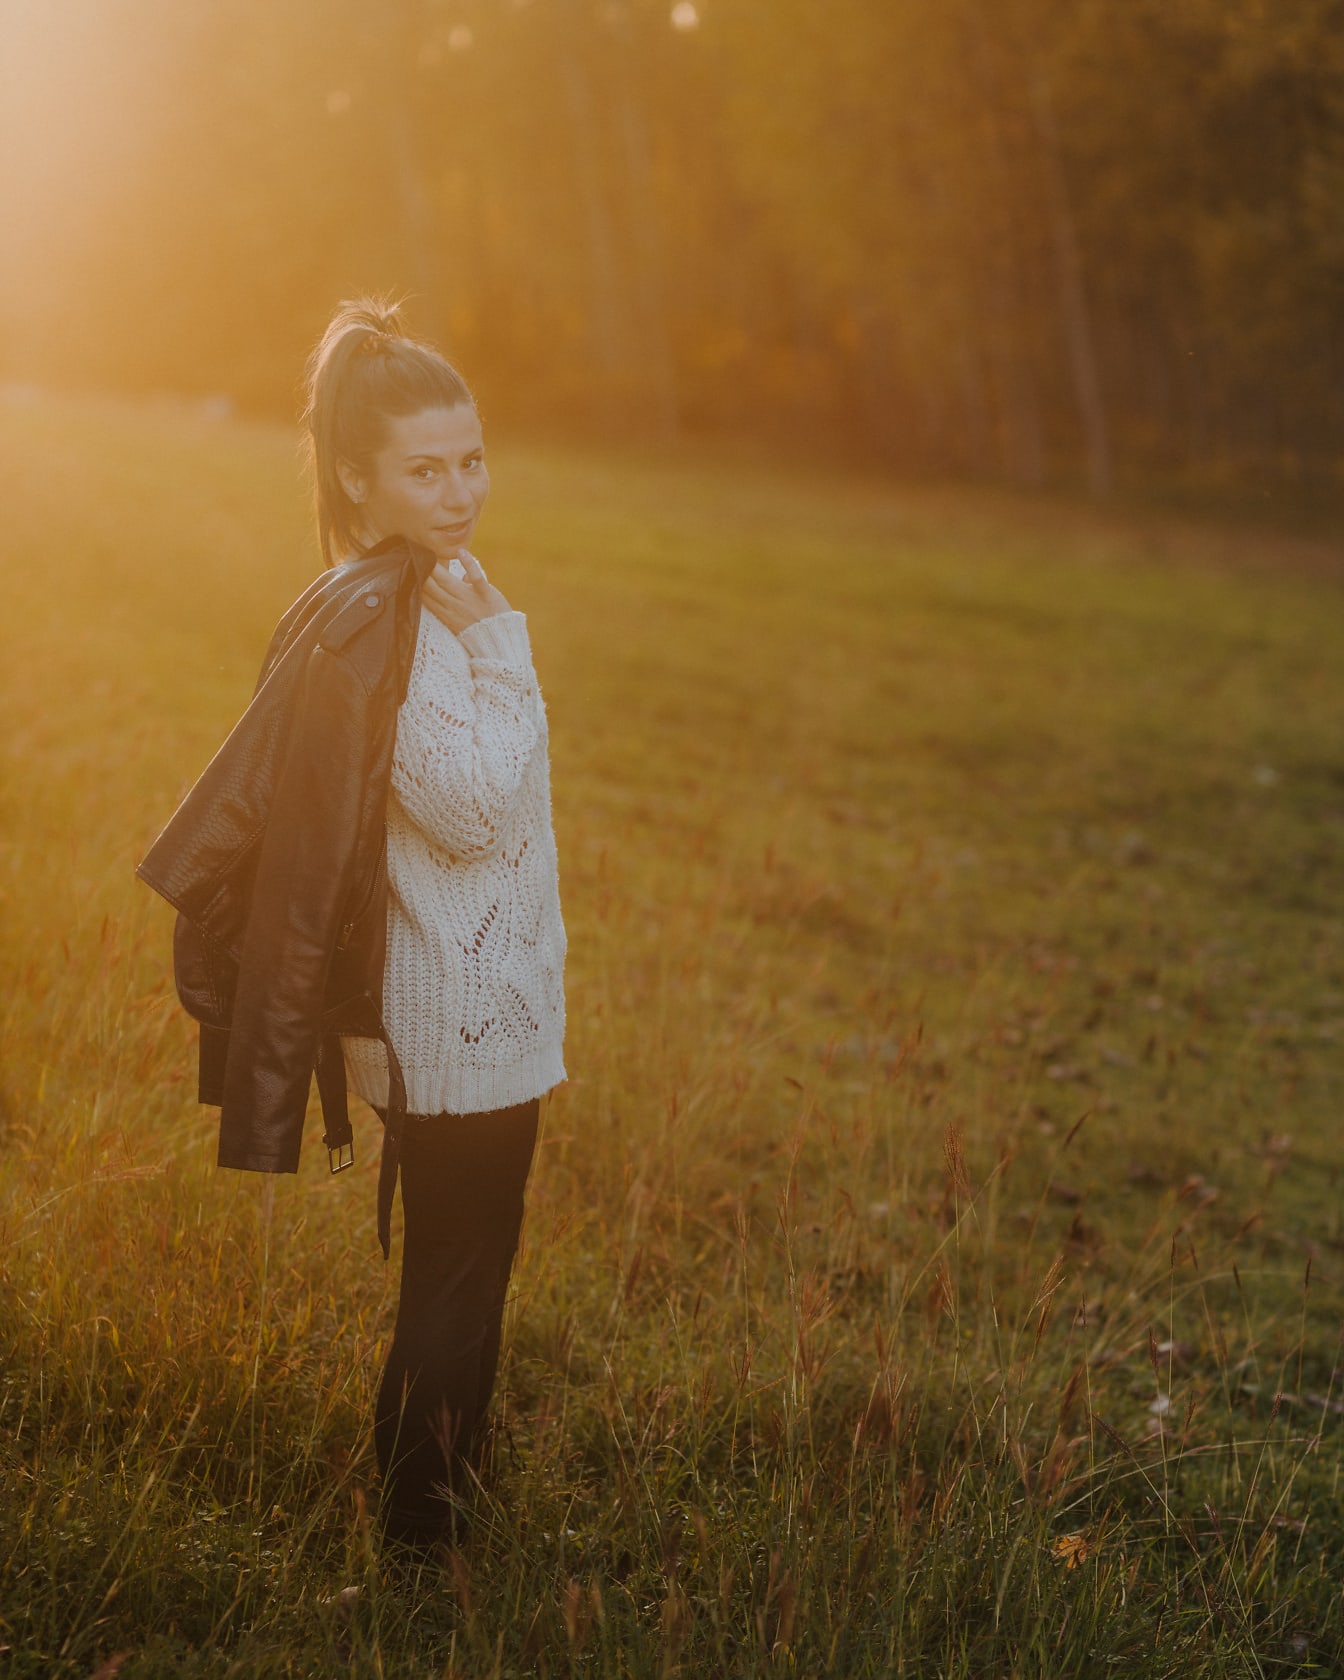 Woman standing in a field with a leather jacket with glowing sunrays as background